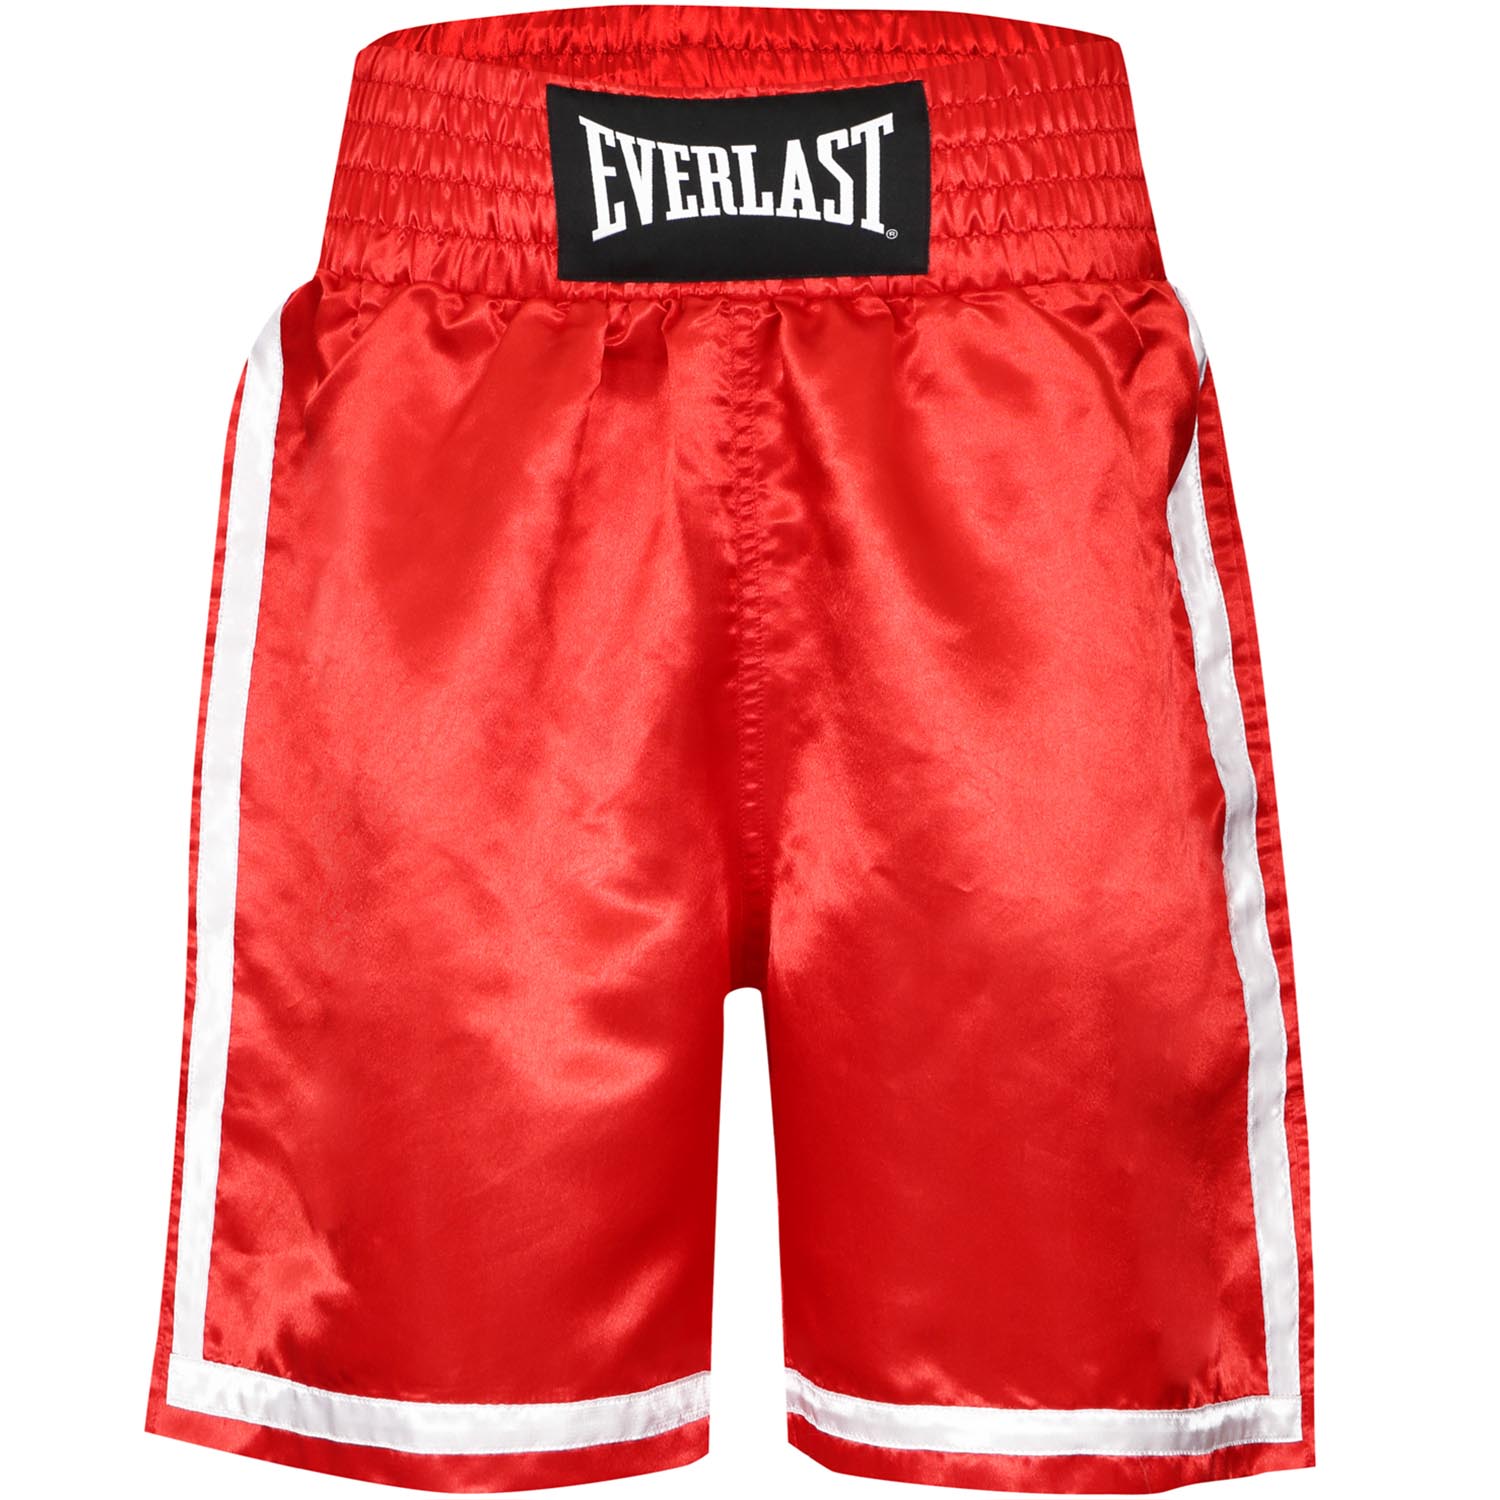 Everlast Boxhose, Competition, red, S